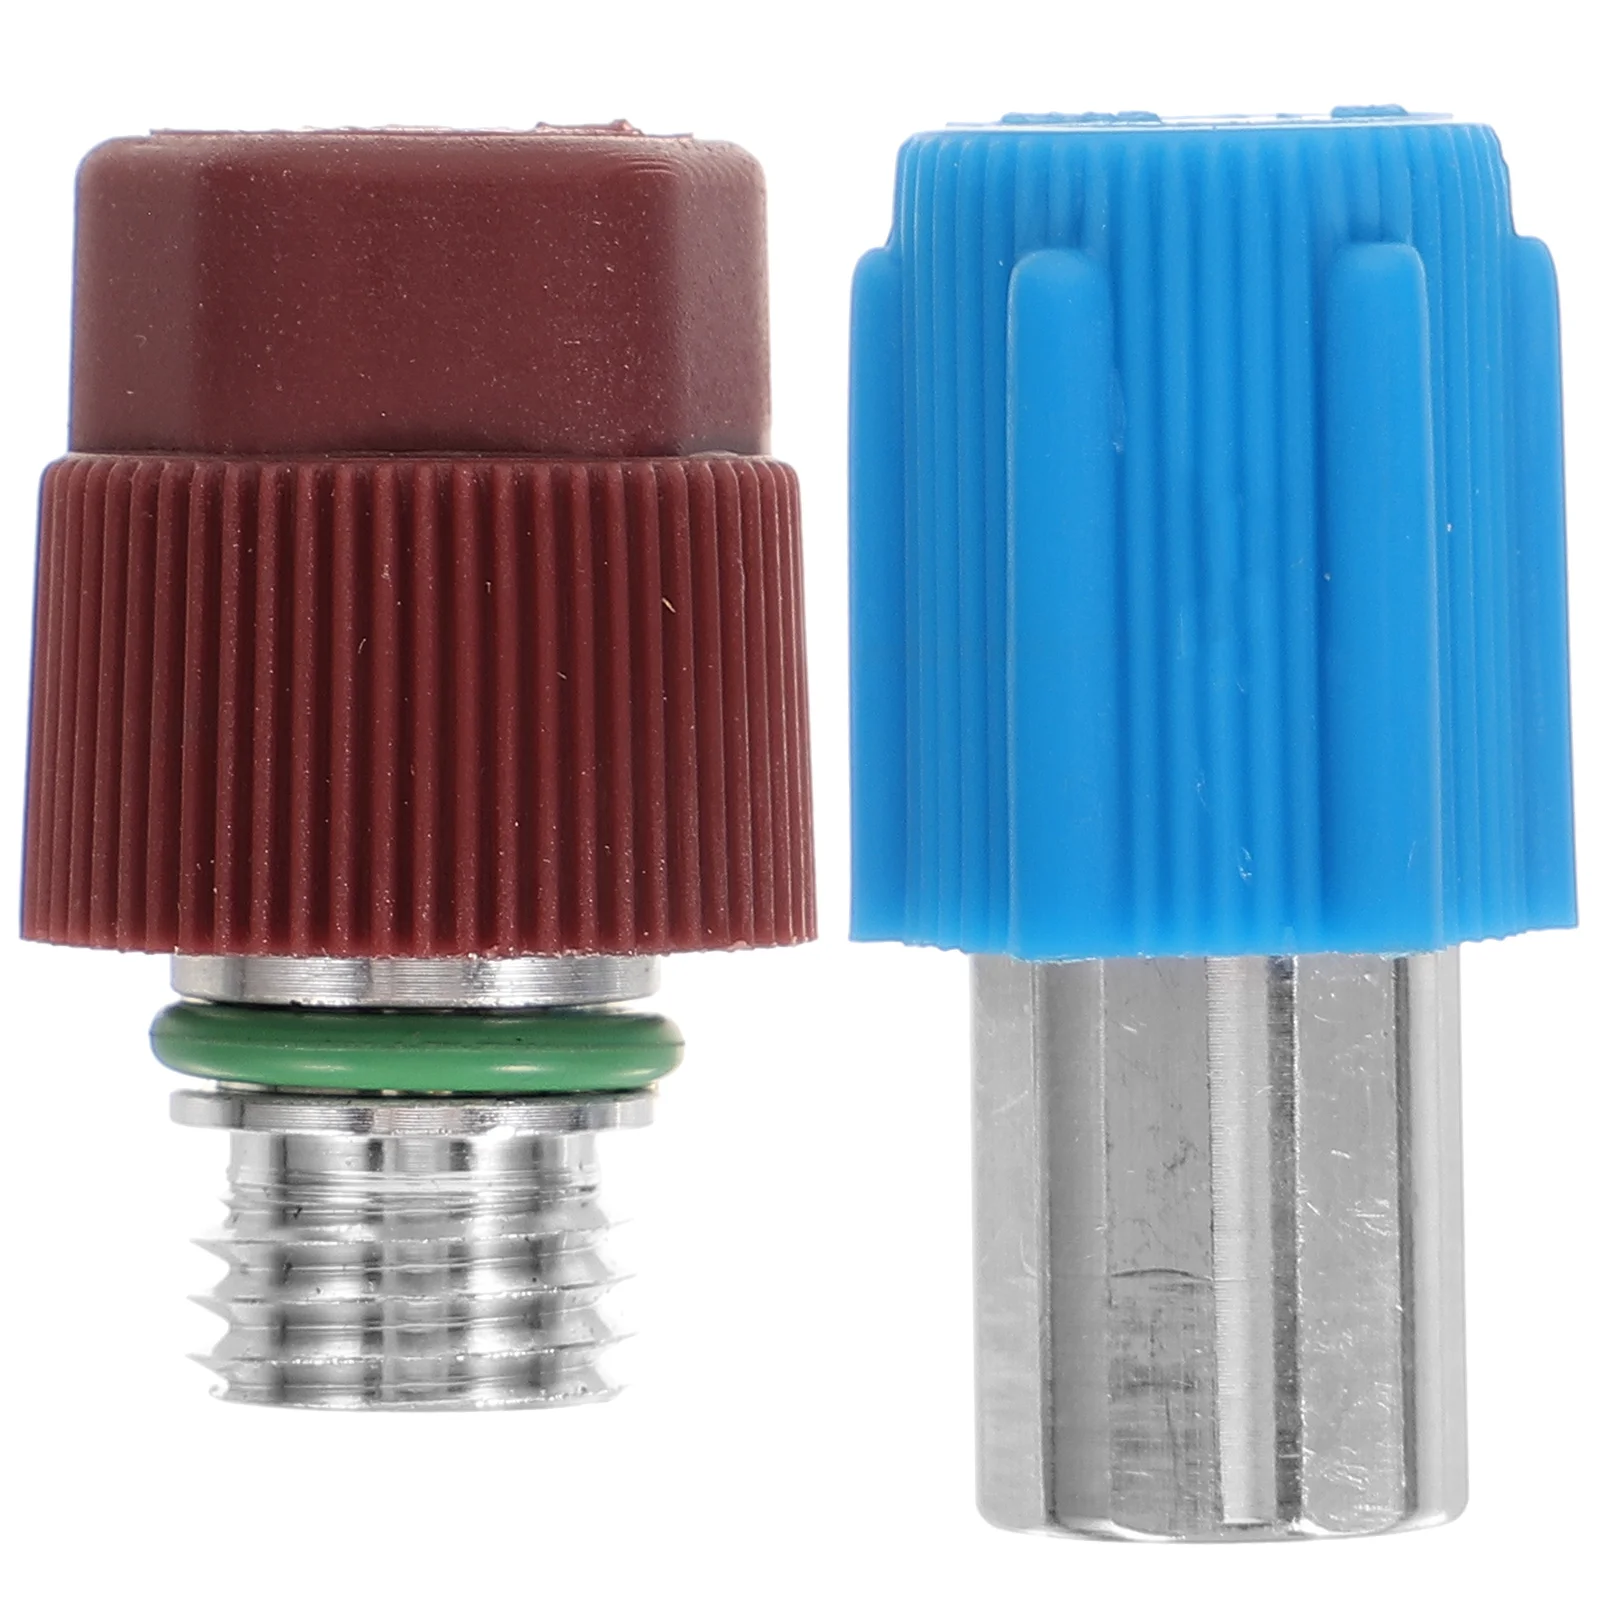 

Refrigerant Splits Connector Conditioner Hose Fitting Air Refrigeration Stainless Steel Adapter Brass